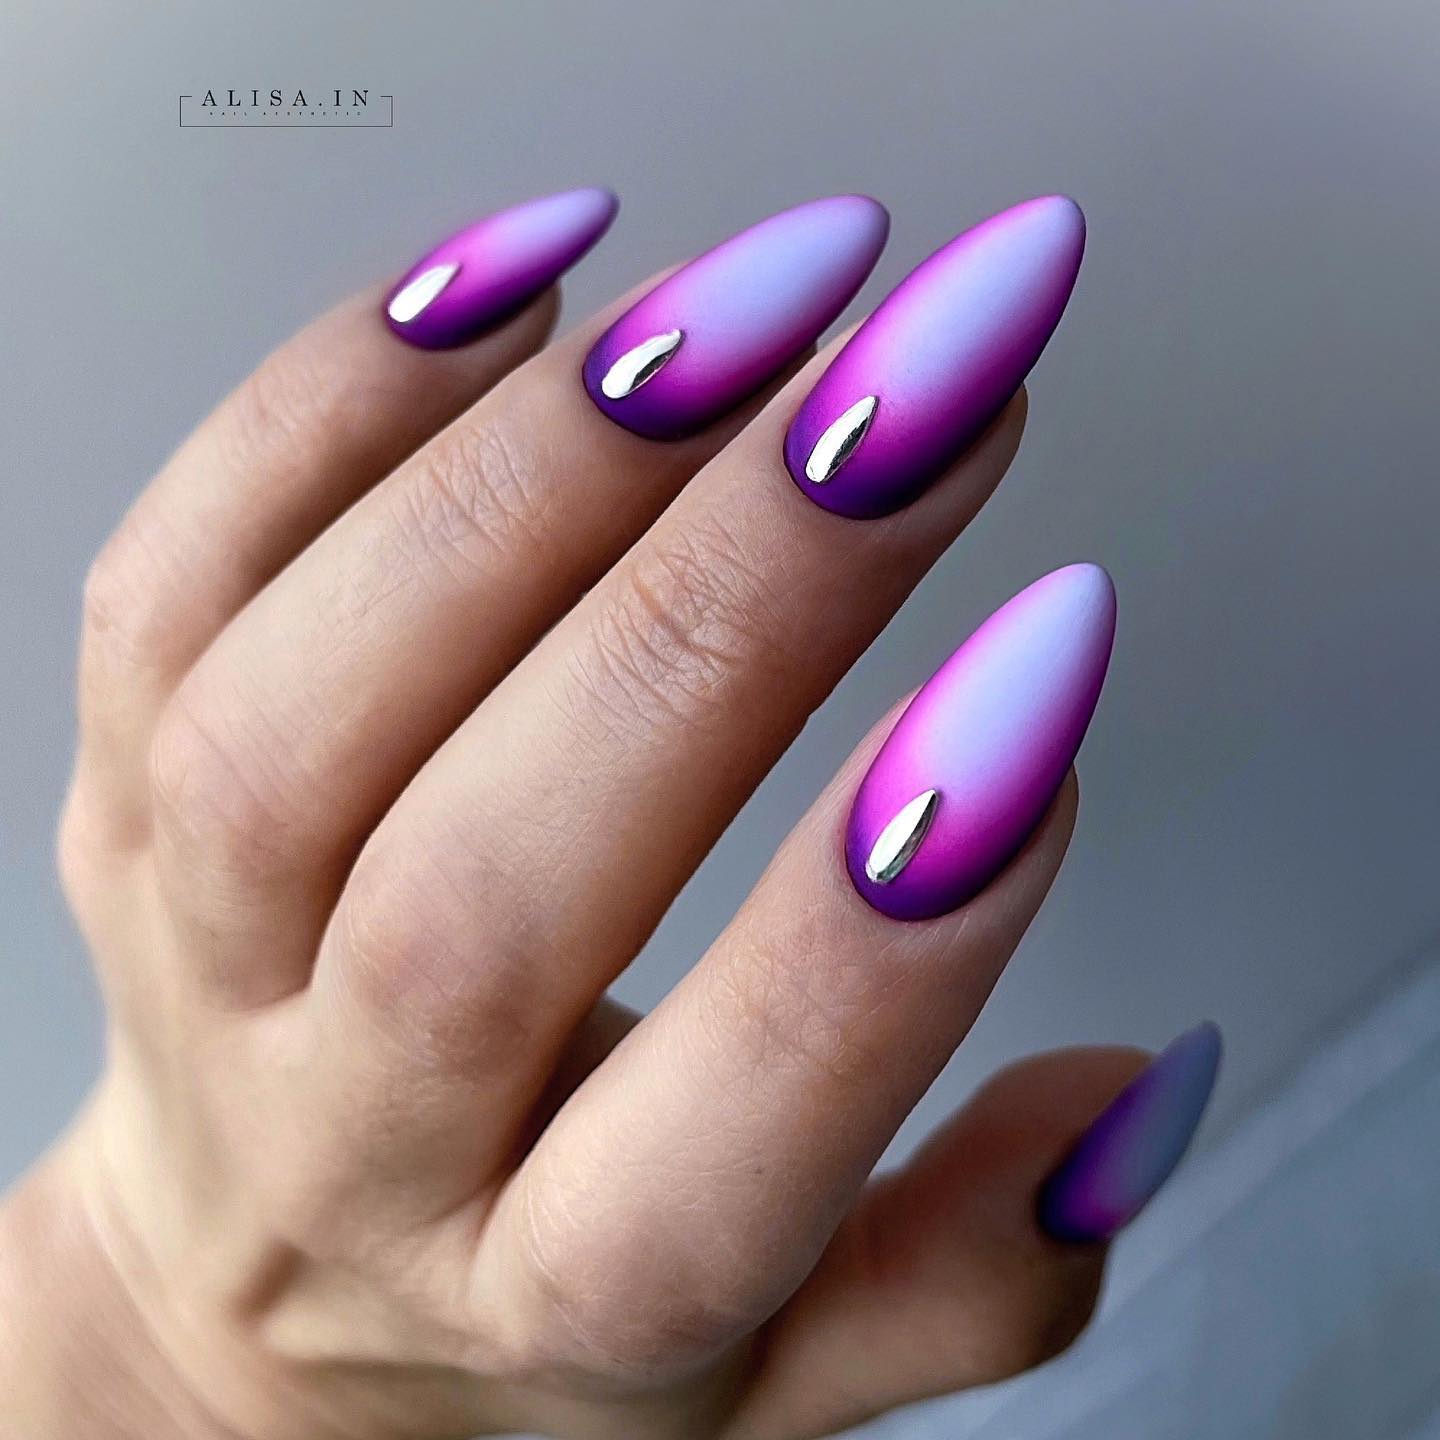 Almond Purple Gel Nails with Silver Design